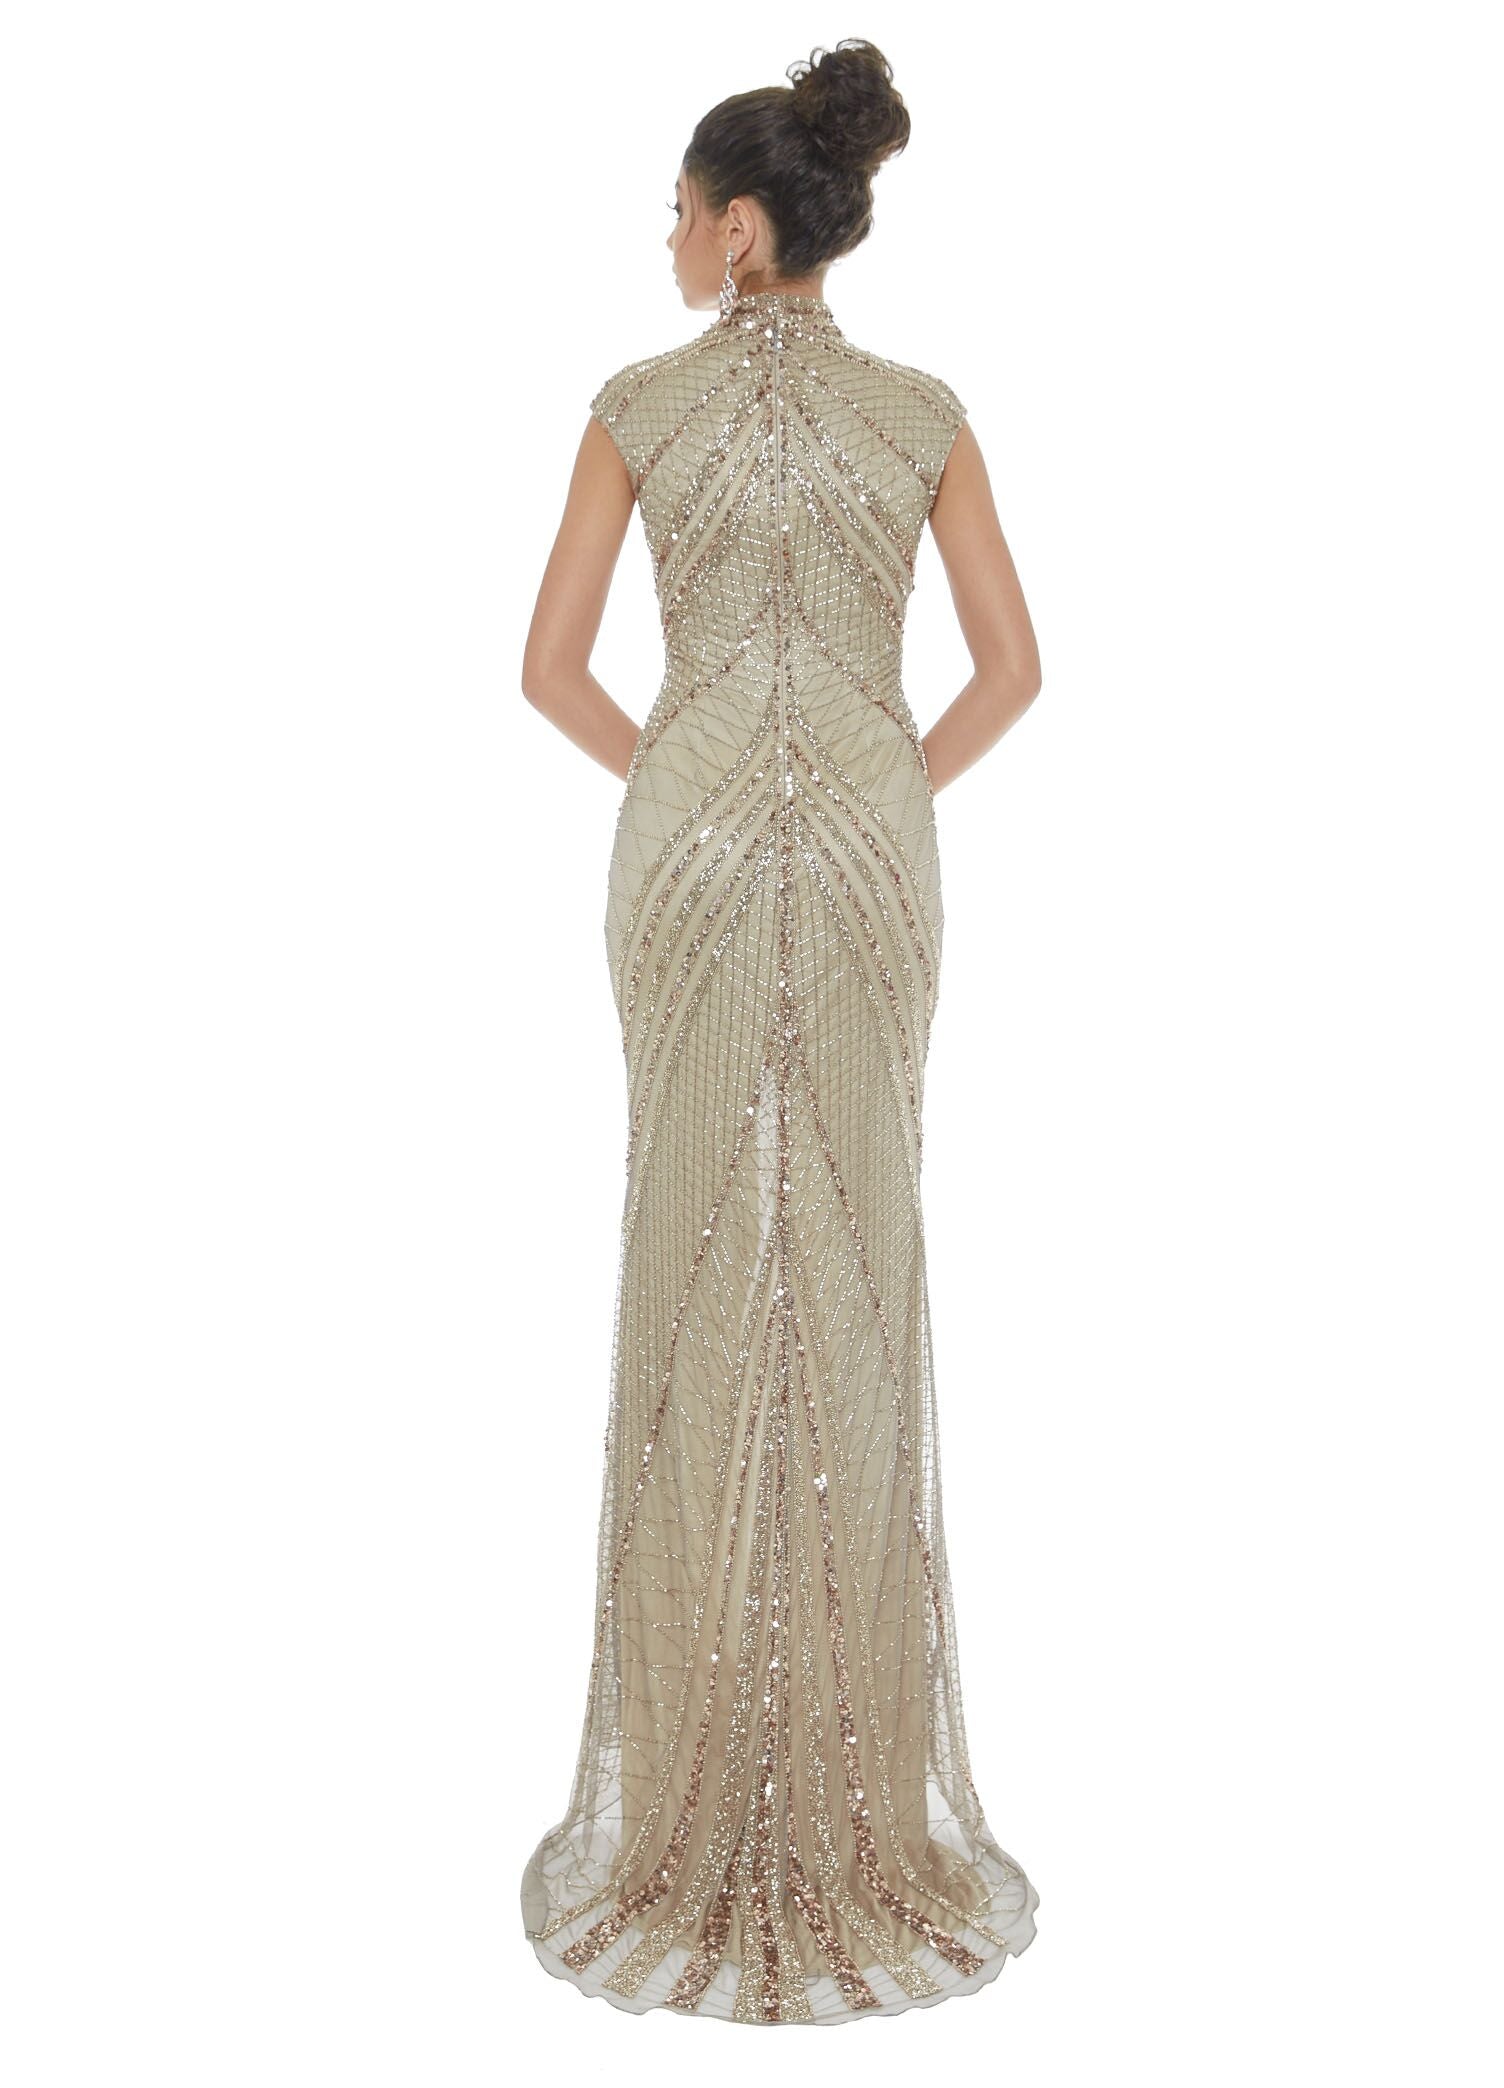 Ashley Lauren 1624 high neckline beaded sequins fitted evening gown with front slit with a figure flattering beaded design pageant gown prom dress